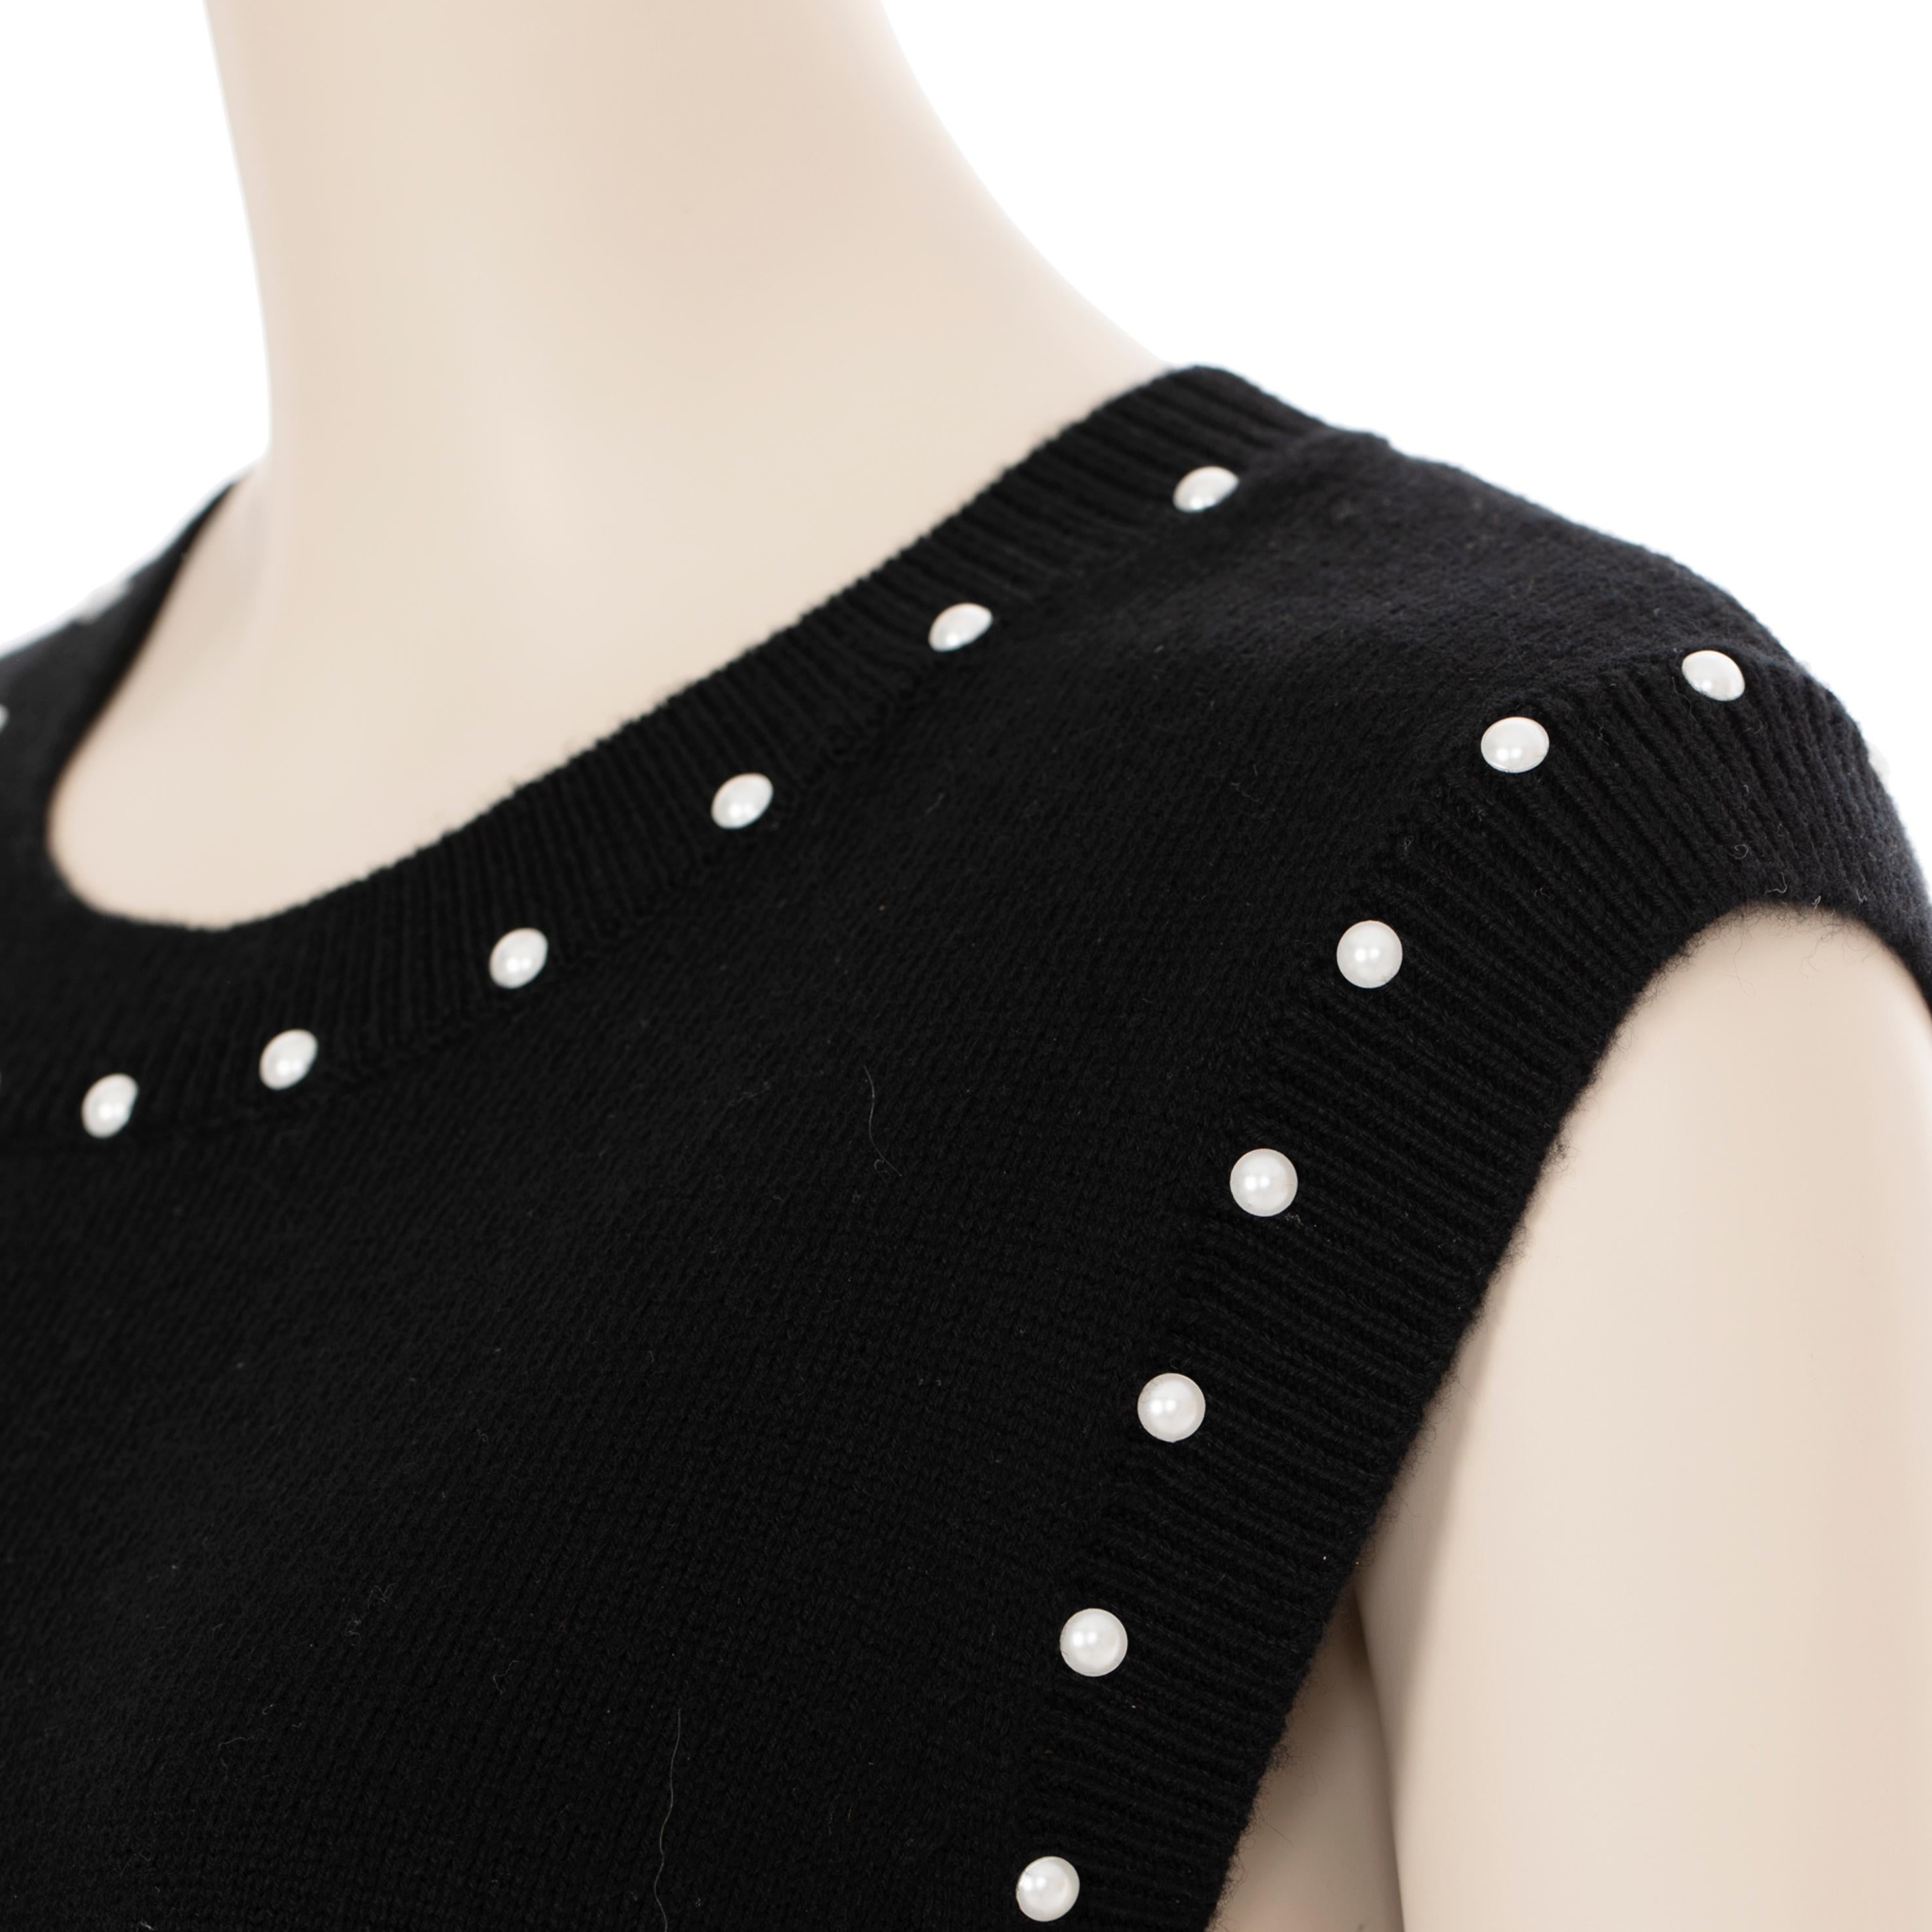 Chanel Black Knit Dress With Faux Pearl Details 40 FR For Sale 12